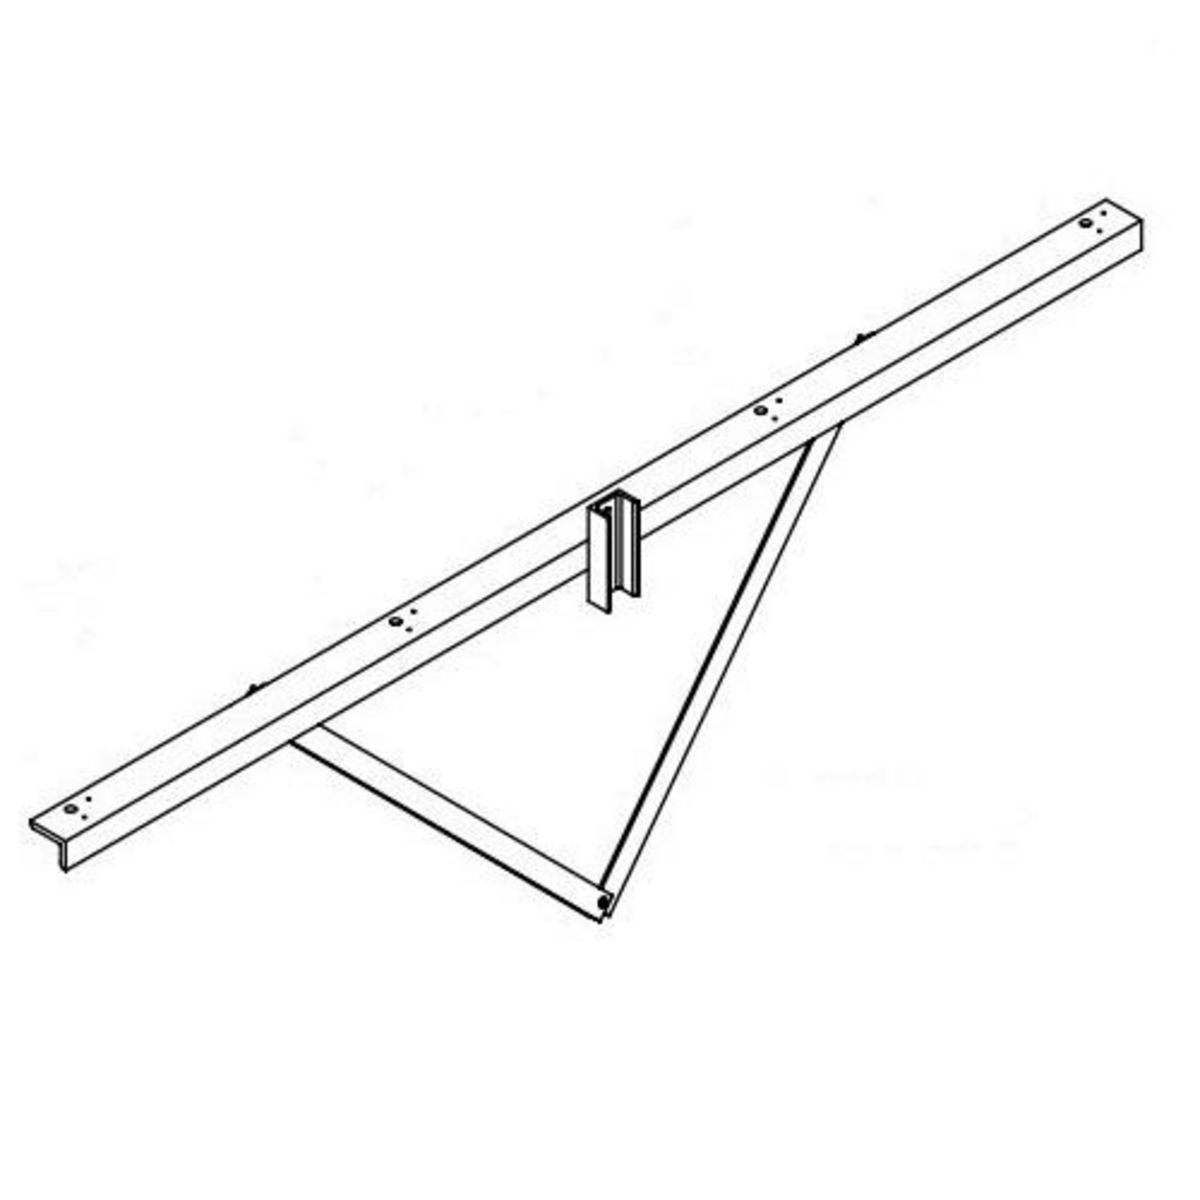 Mount Accessory, wood pole, 4 fixtures